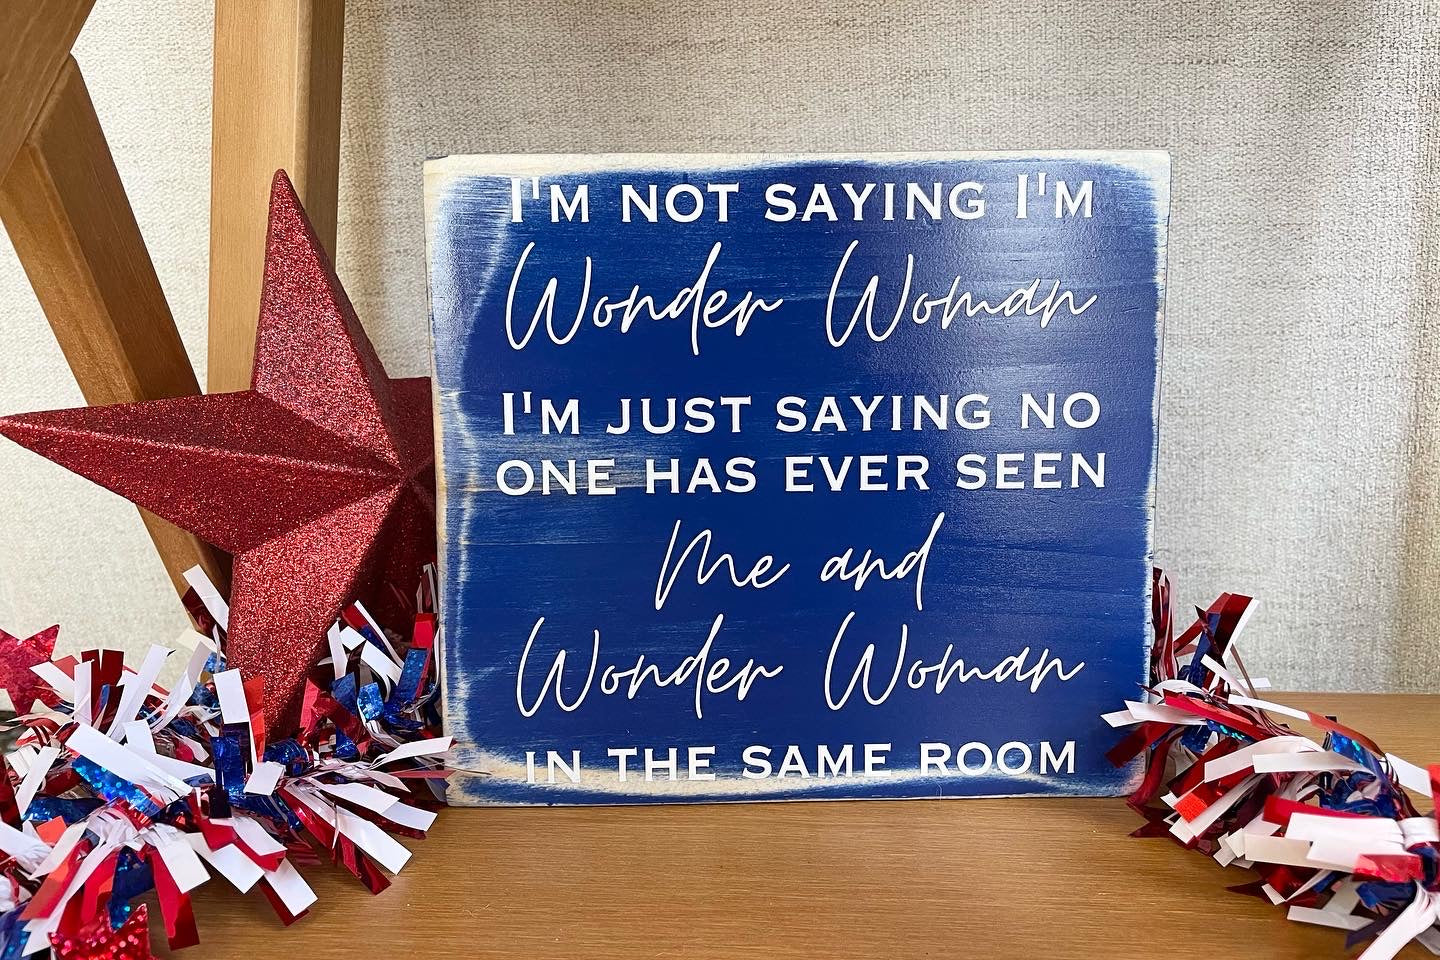 medium sized square wood sign painted blue with white lettering that reads, " I'm not saying I'm Wonder Woman, I'm just saying no one has ever seen me and Wonder Woman in the same room". All text is in all caps except for "Wonder Woman" and "Me and Wonder Woman". Text is centered, takes up the entire area and is on 7 lines. Glossy finish.